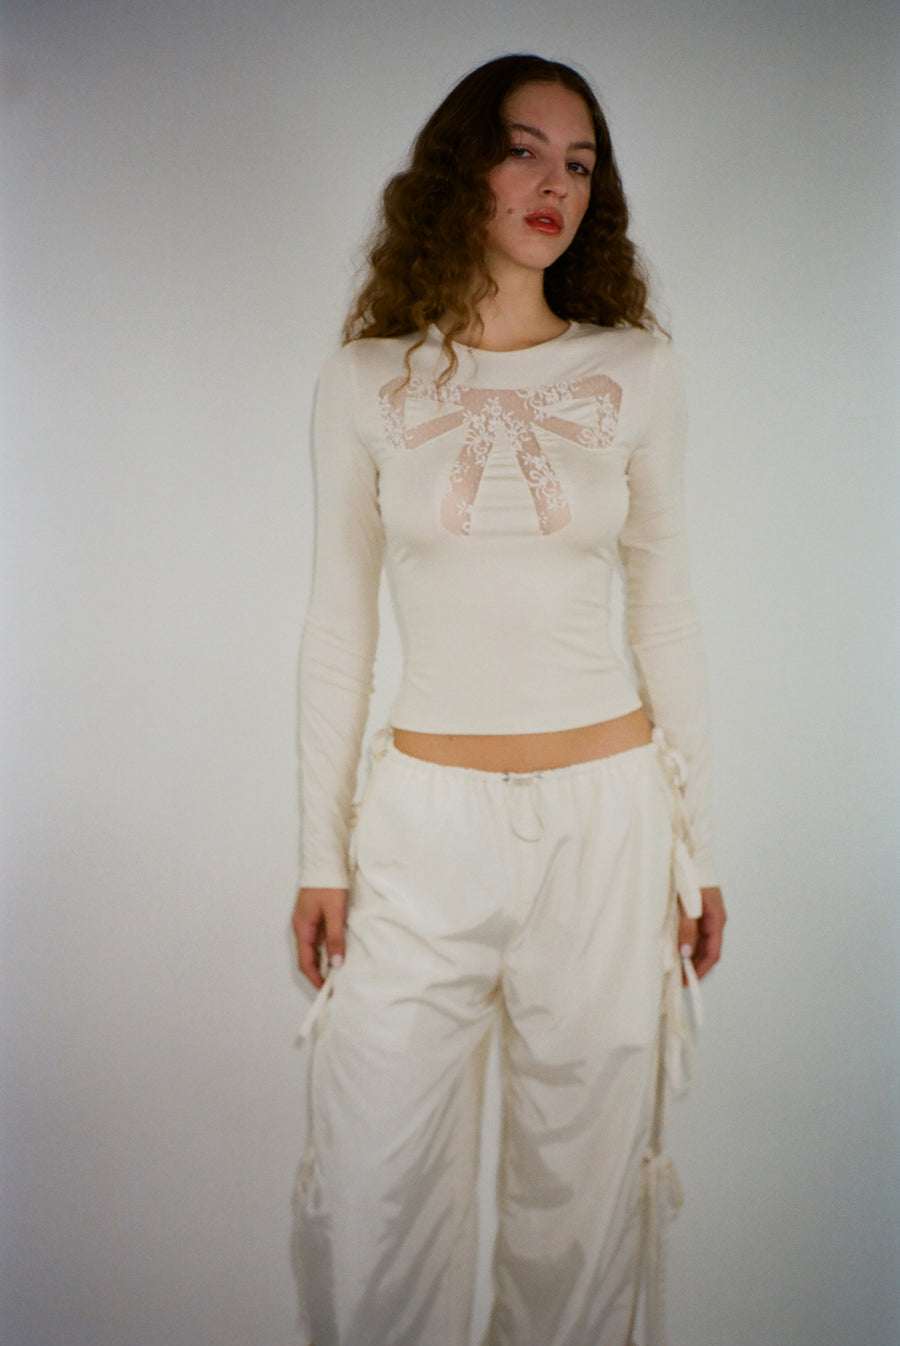 Long sleeve top in off white with lace cut out bow detail on model